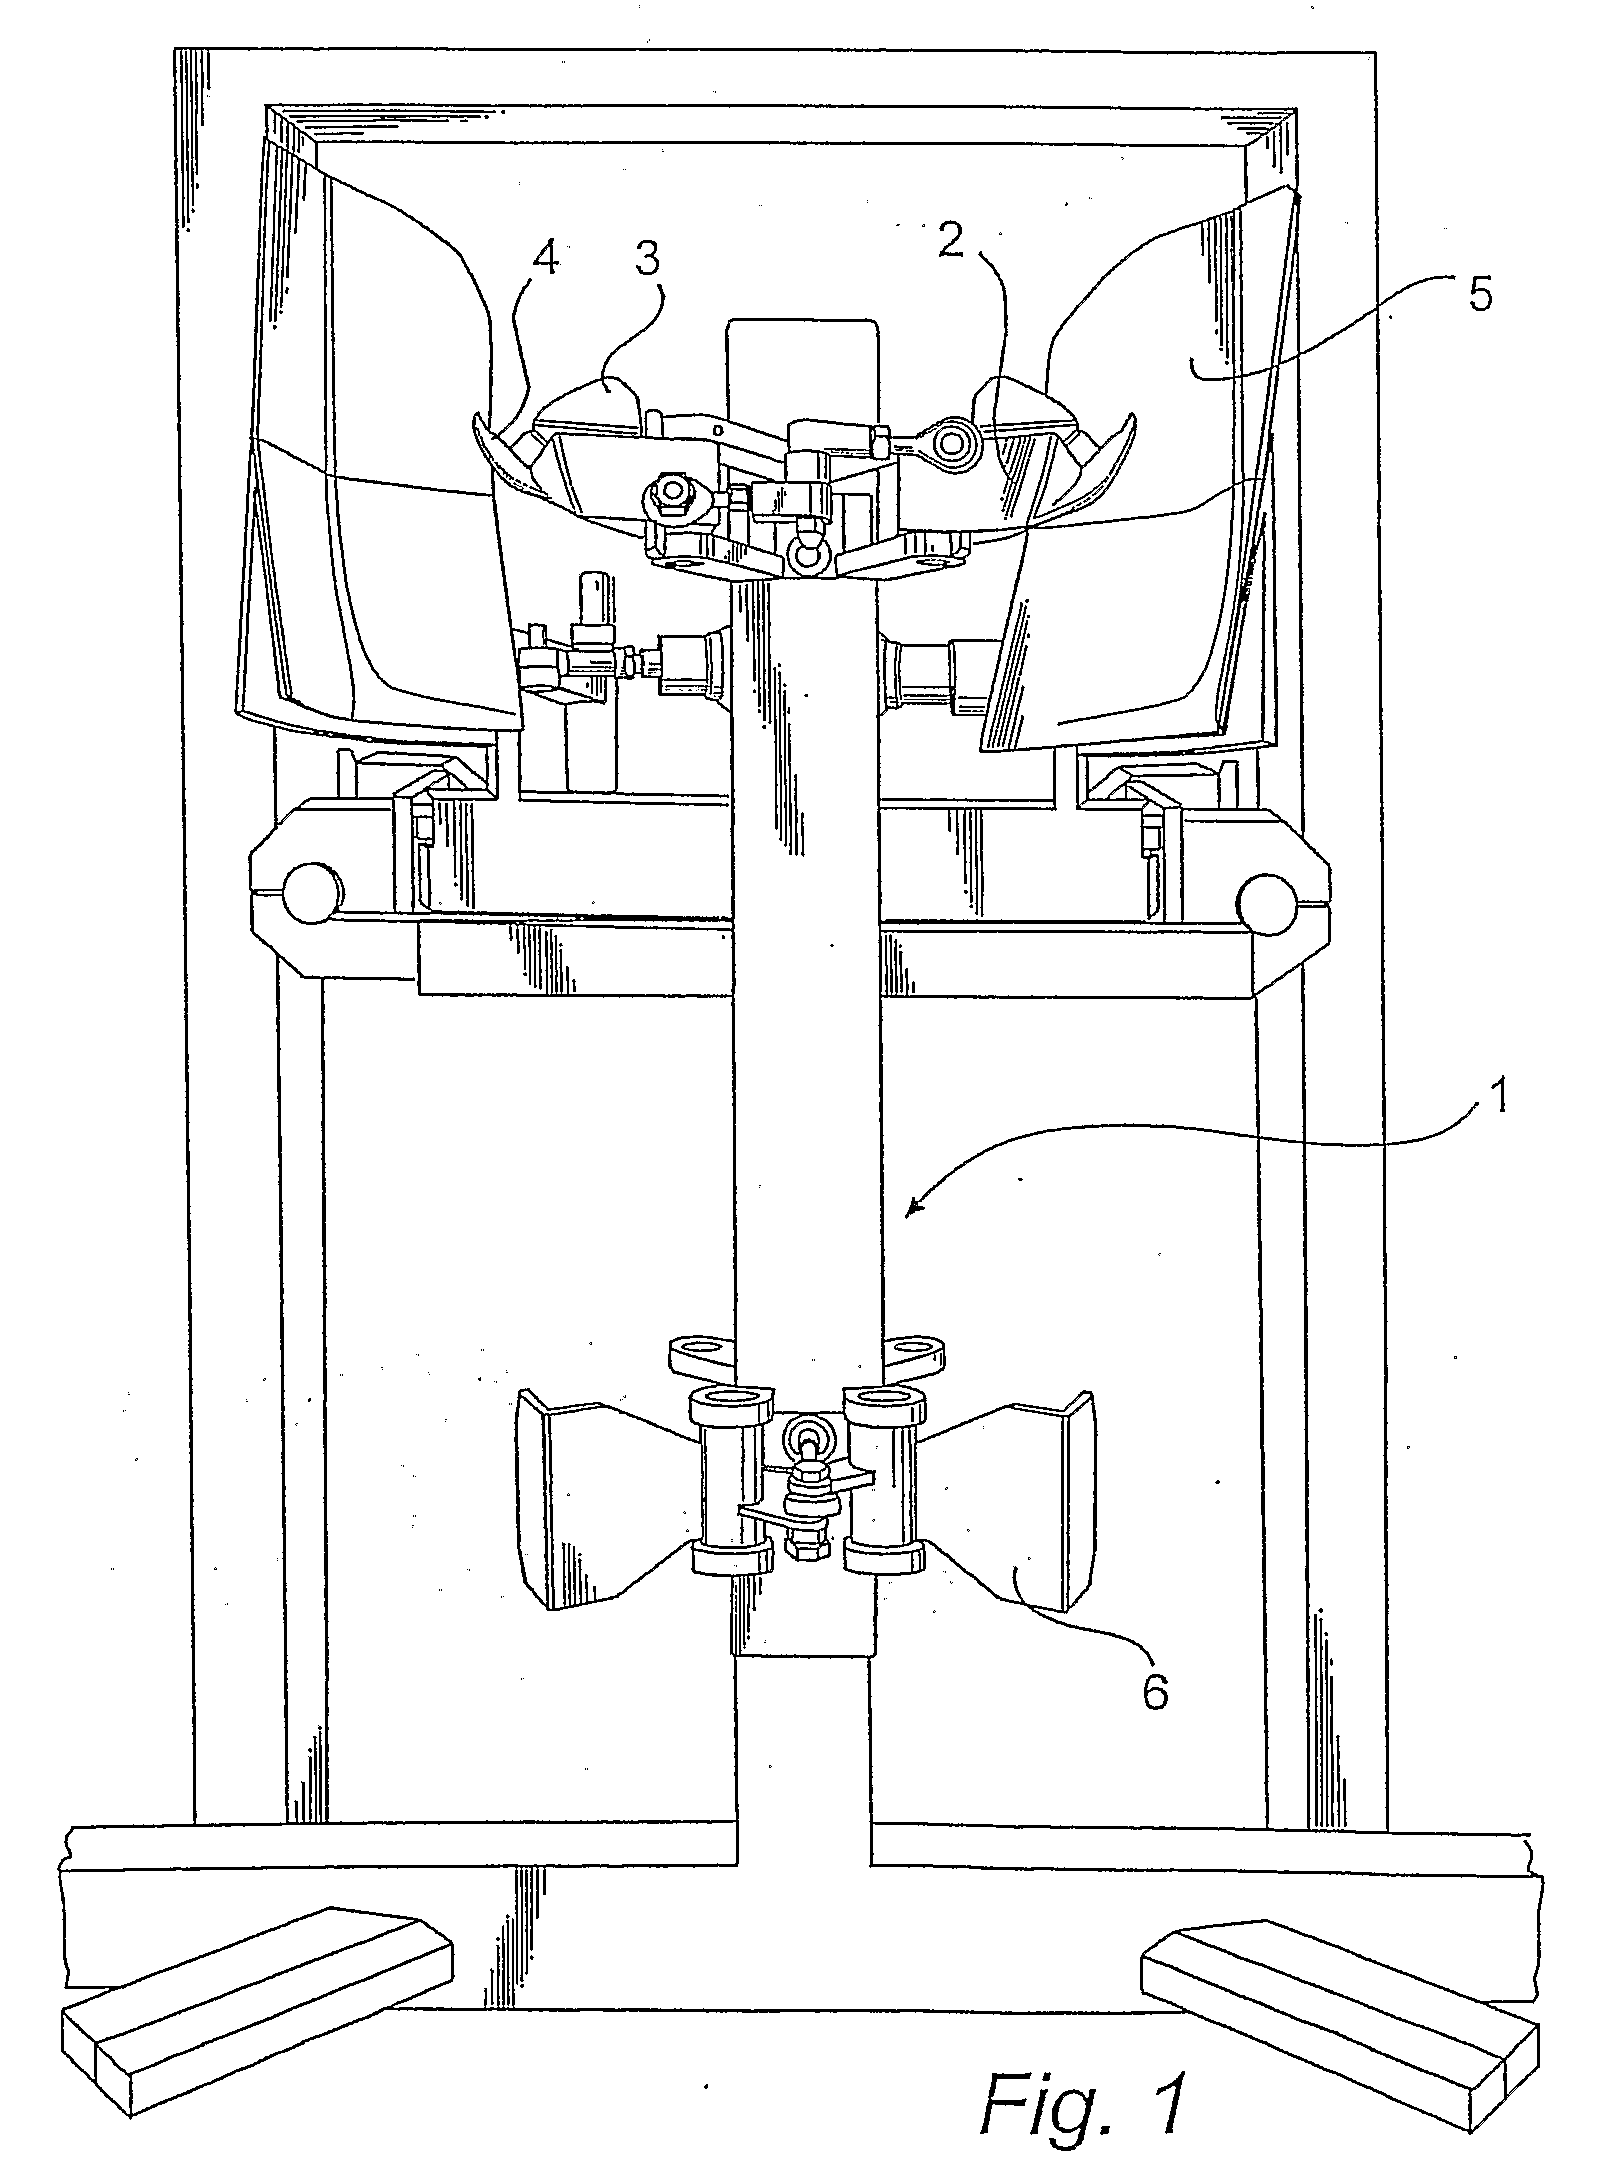 Apparatus and Method for Cutting-Free of Tender-Loin